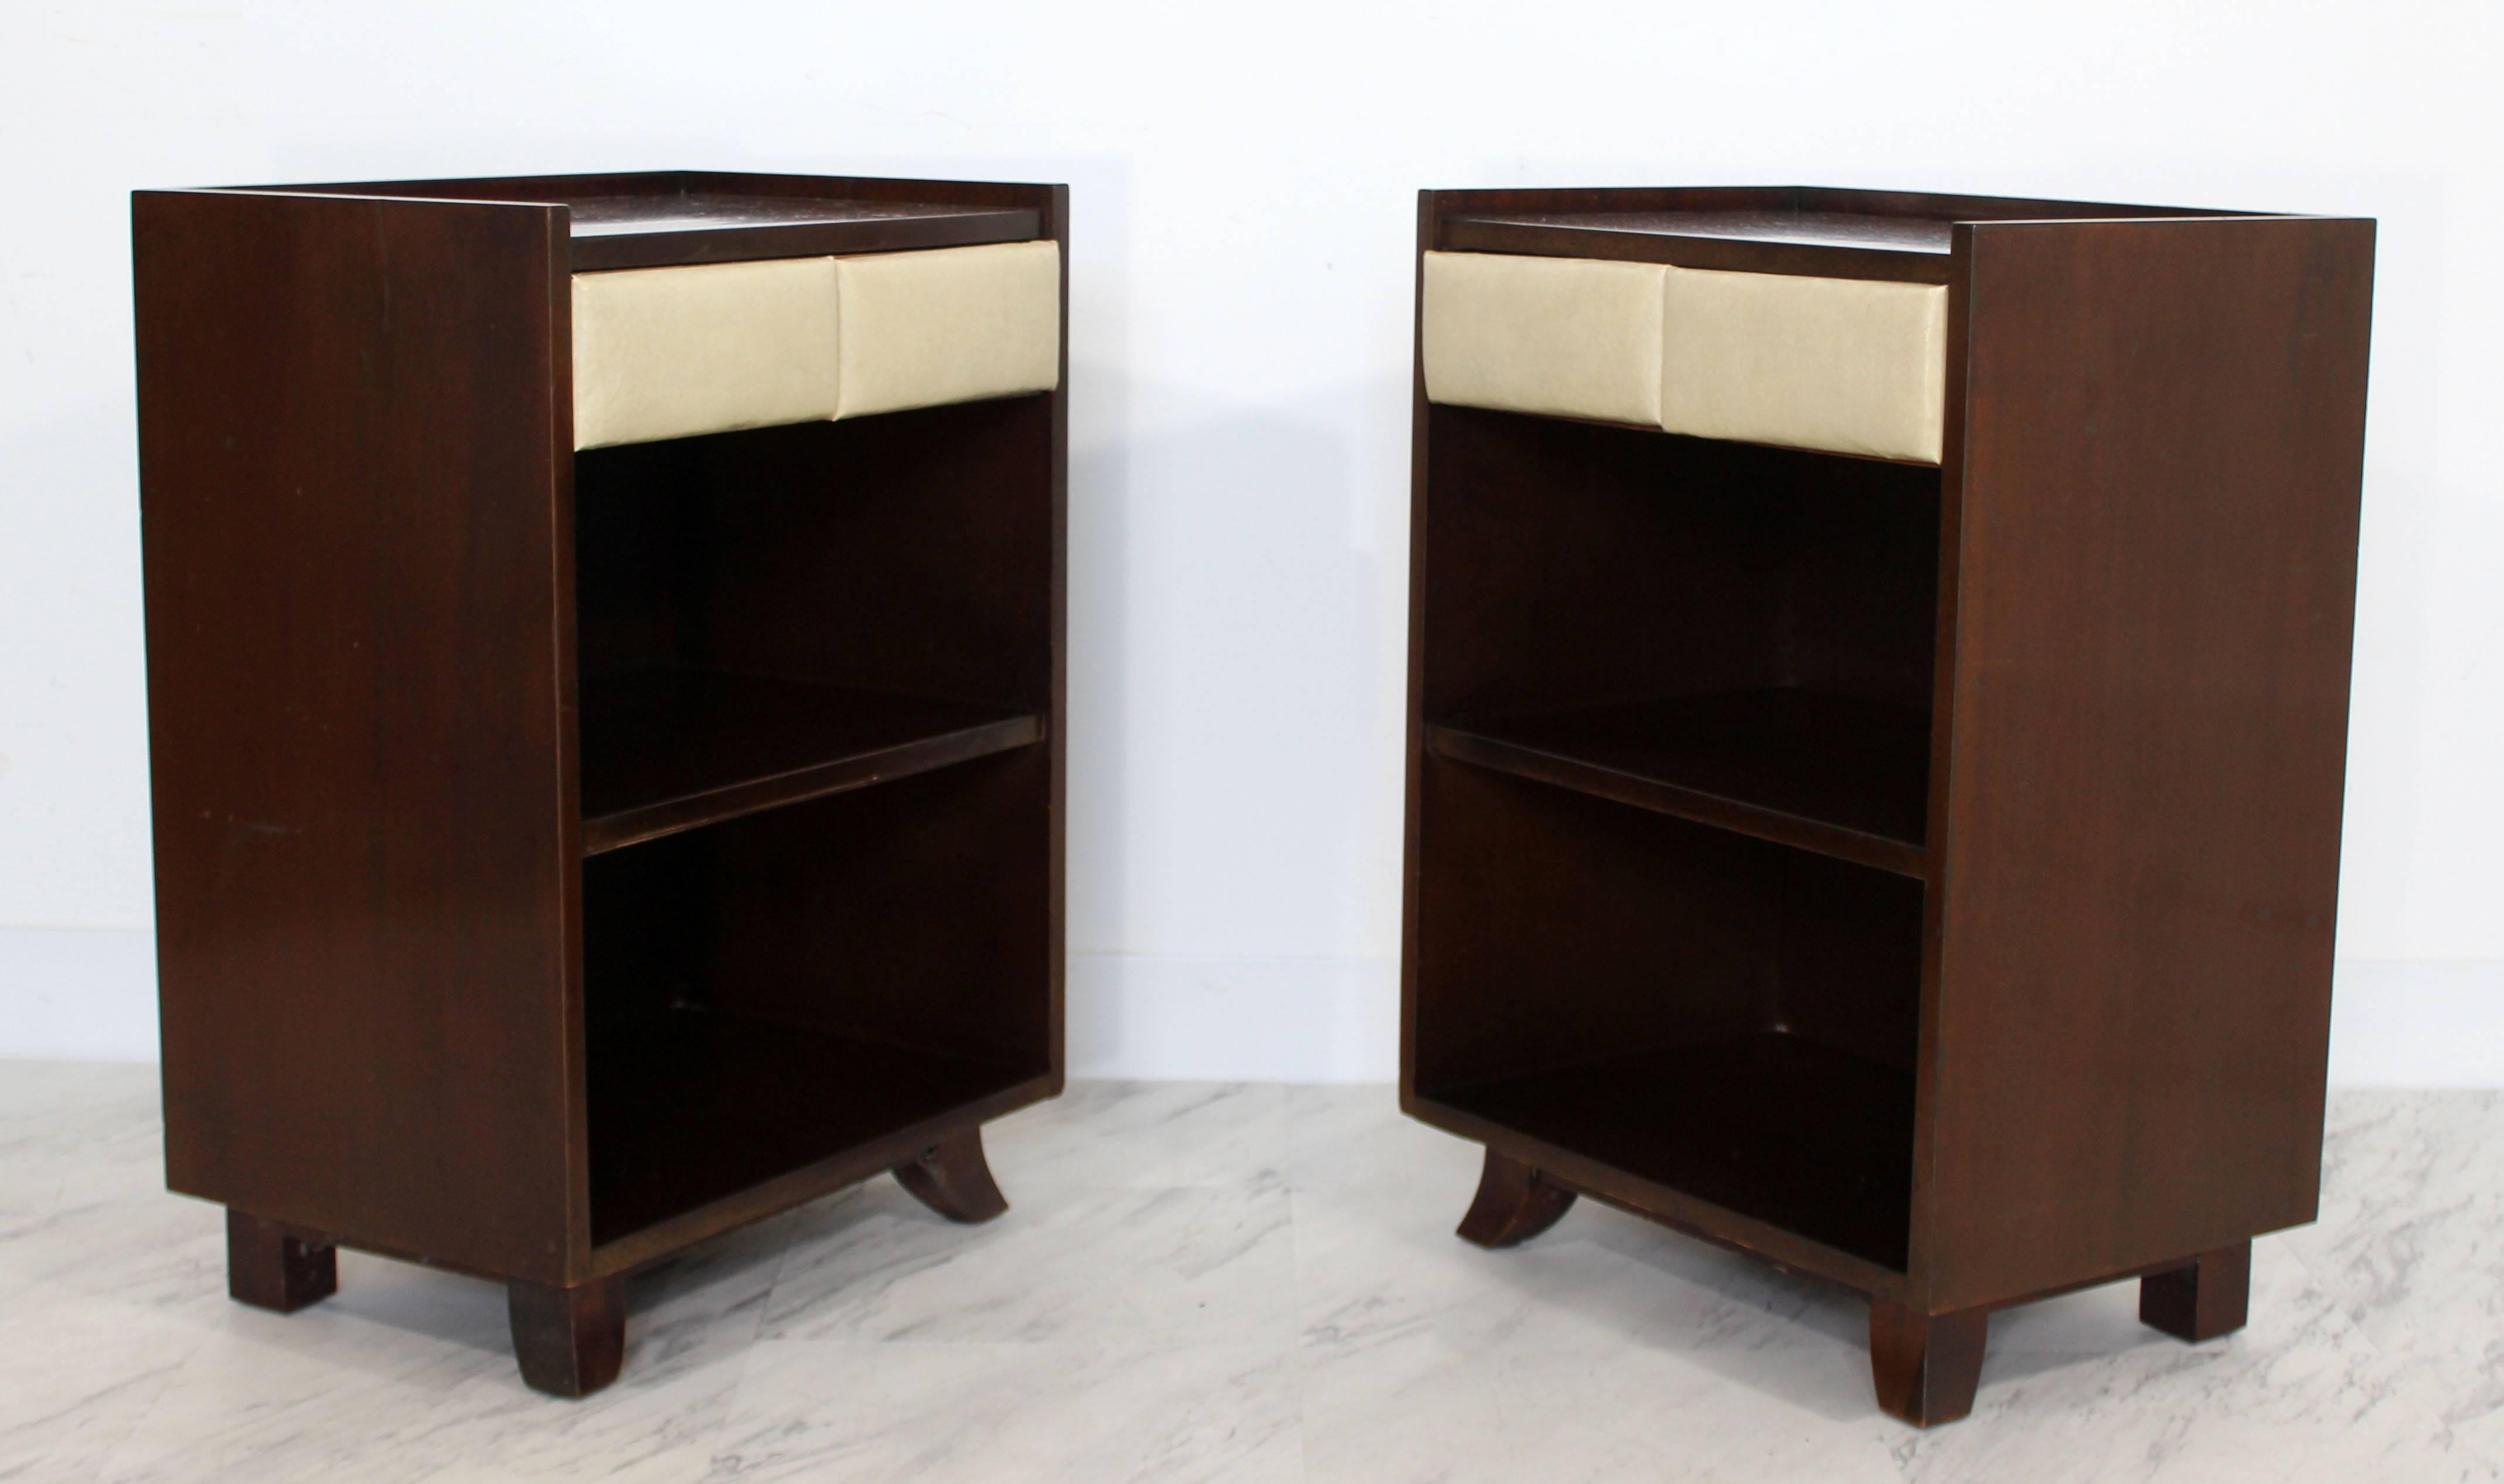 For your consideration is a wonderful pair of mahogany nightstands, with padded cream drawers, by Gilbert Rohde, circa the 1930s. In excellent condition. The dimensions are 18